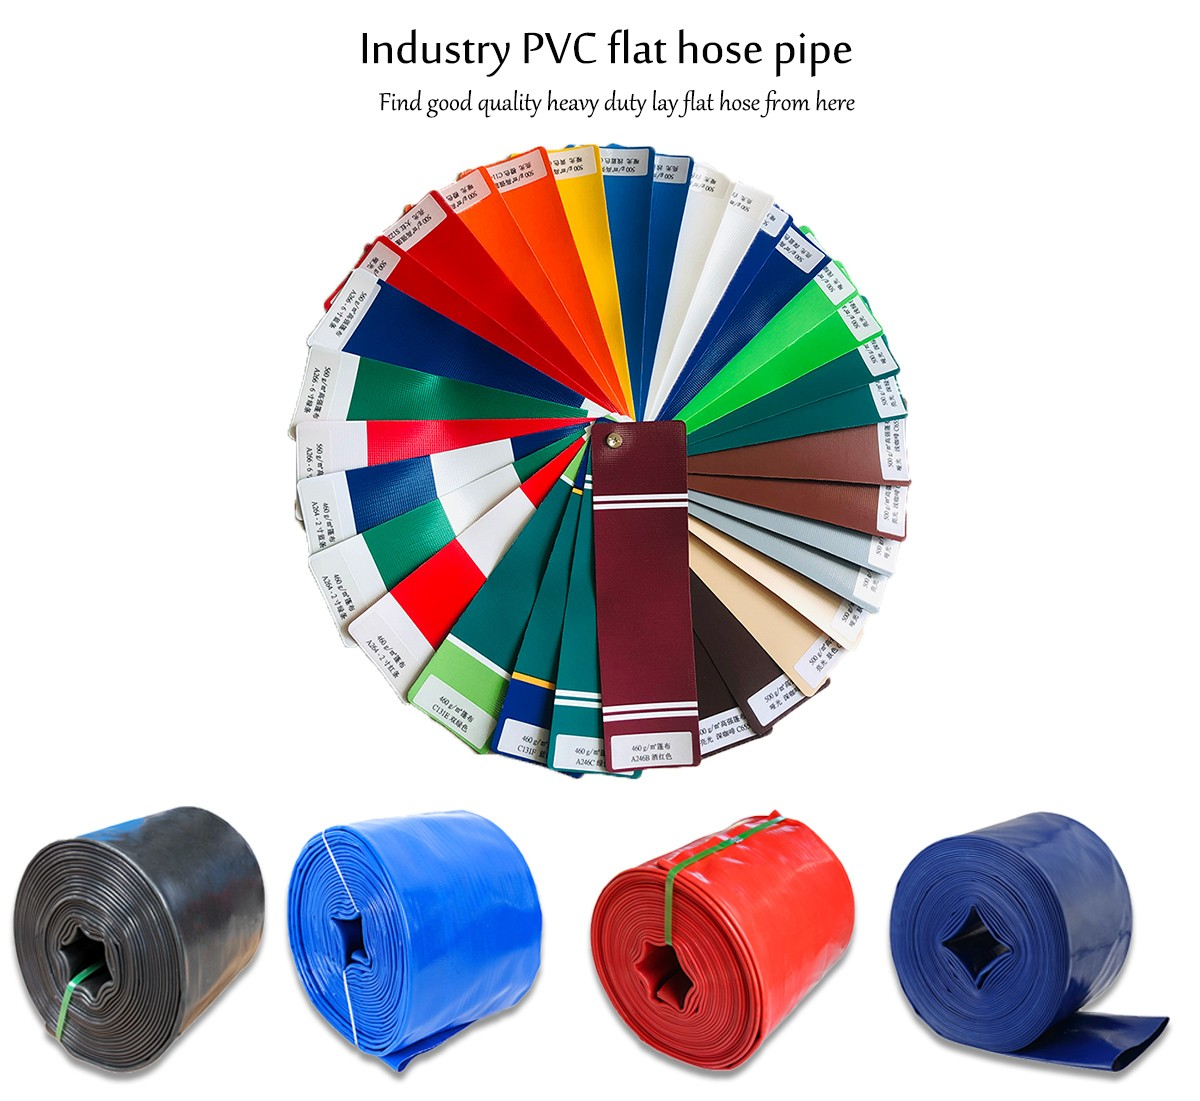 12 Inch industry PVC irrigation lay flat hose pipe